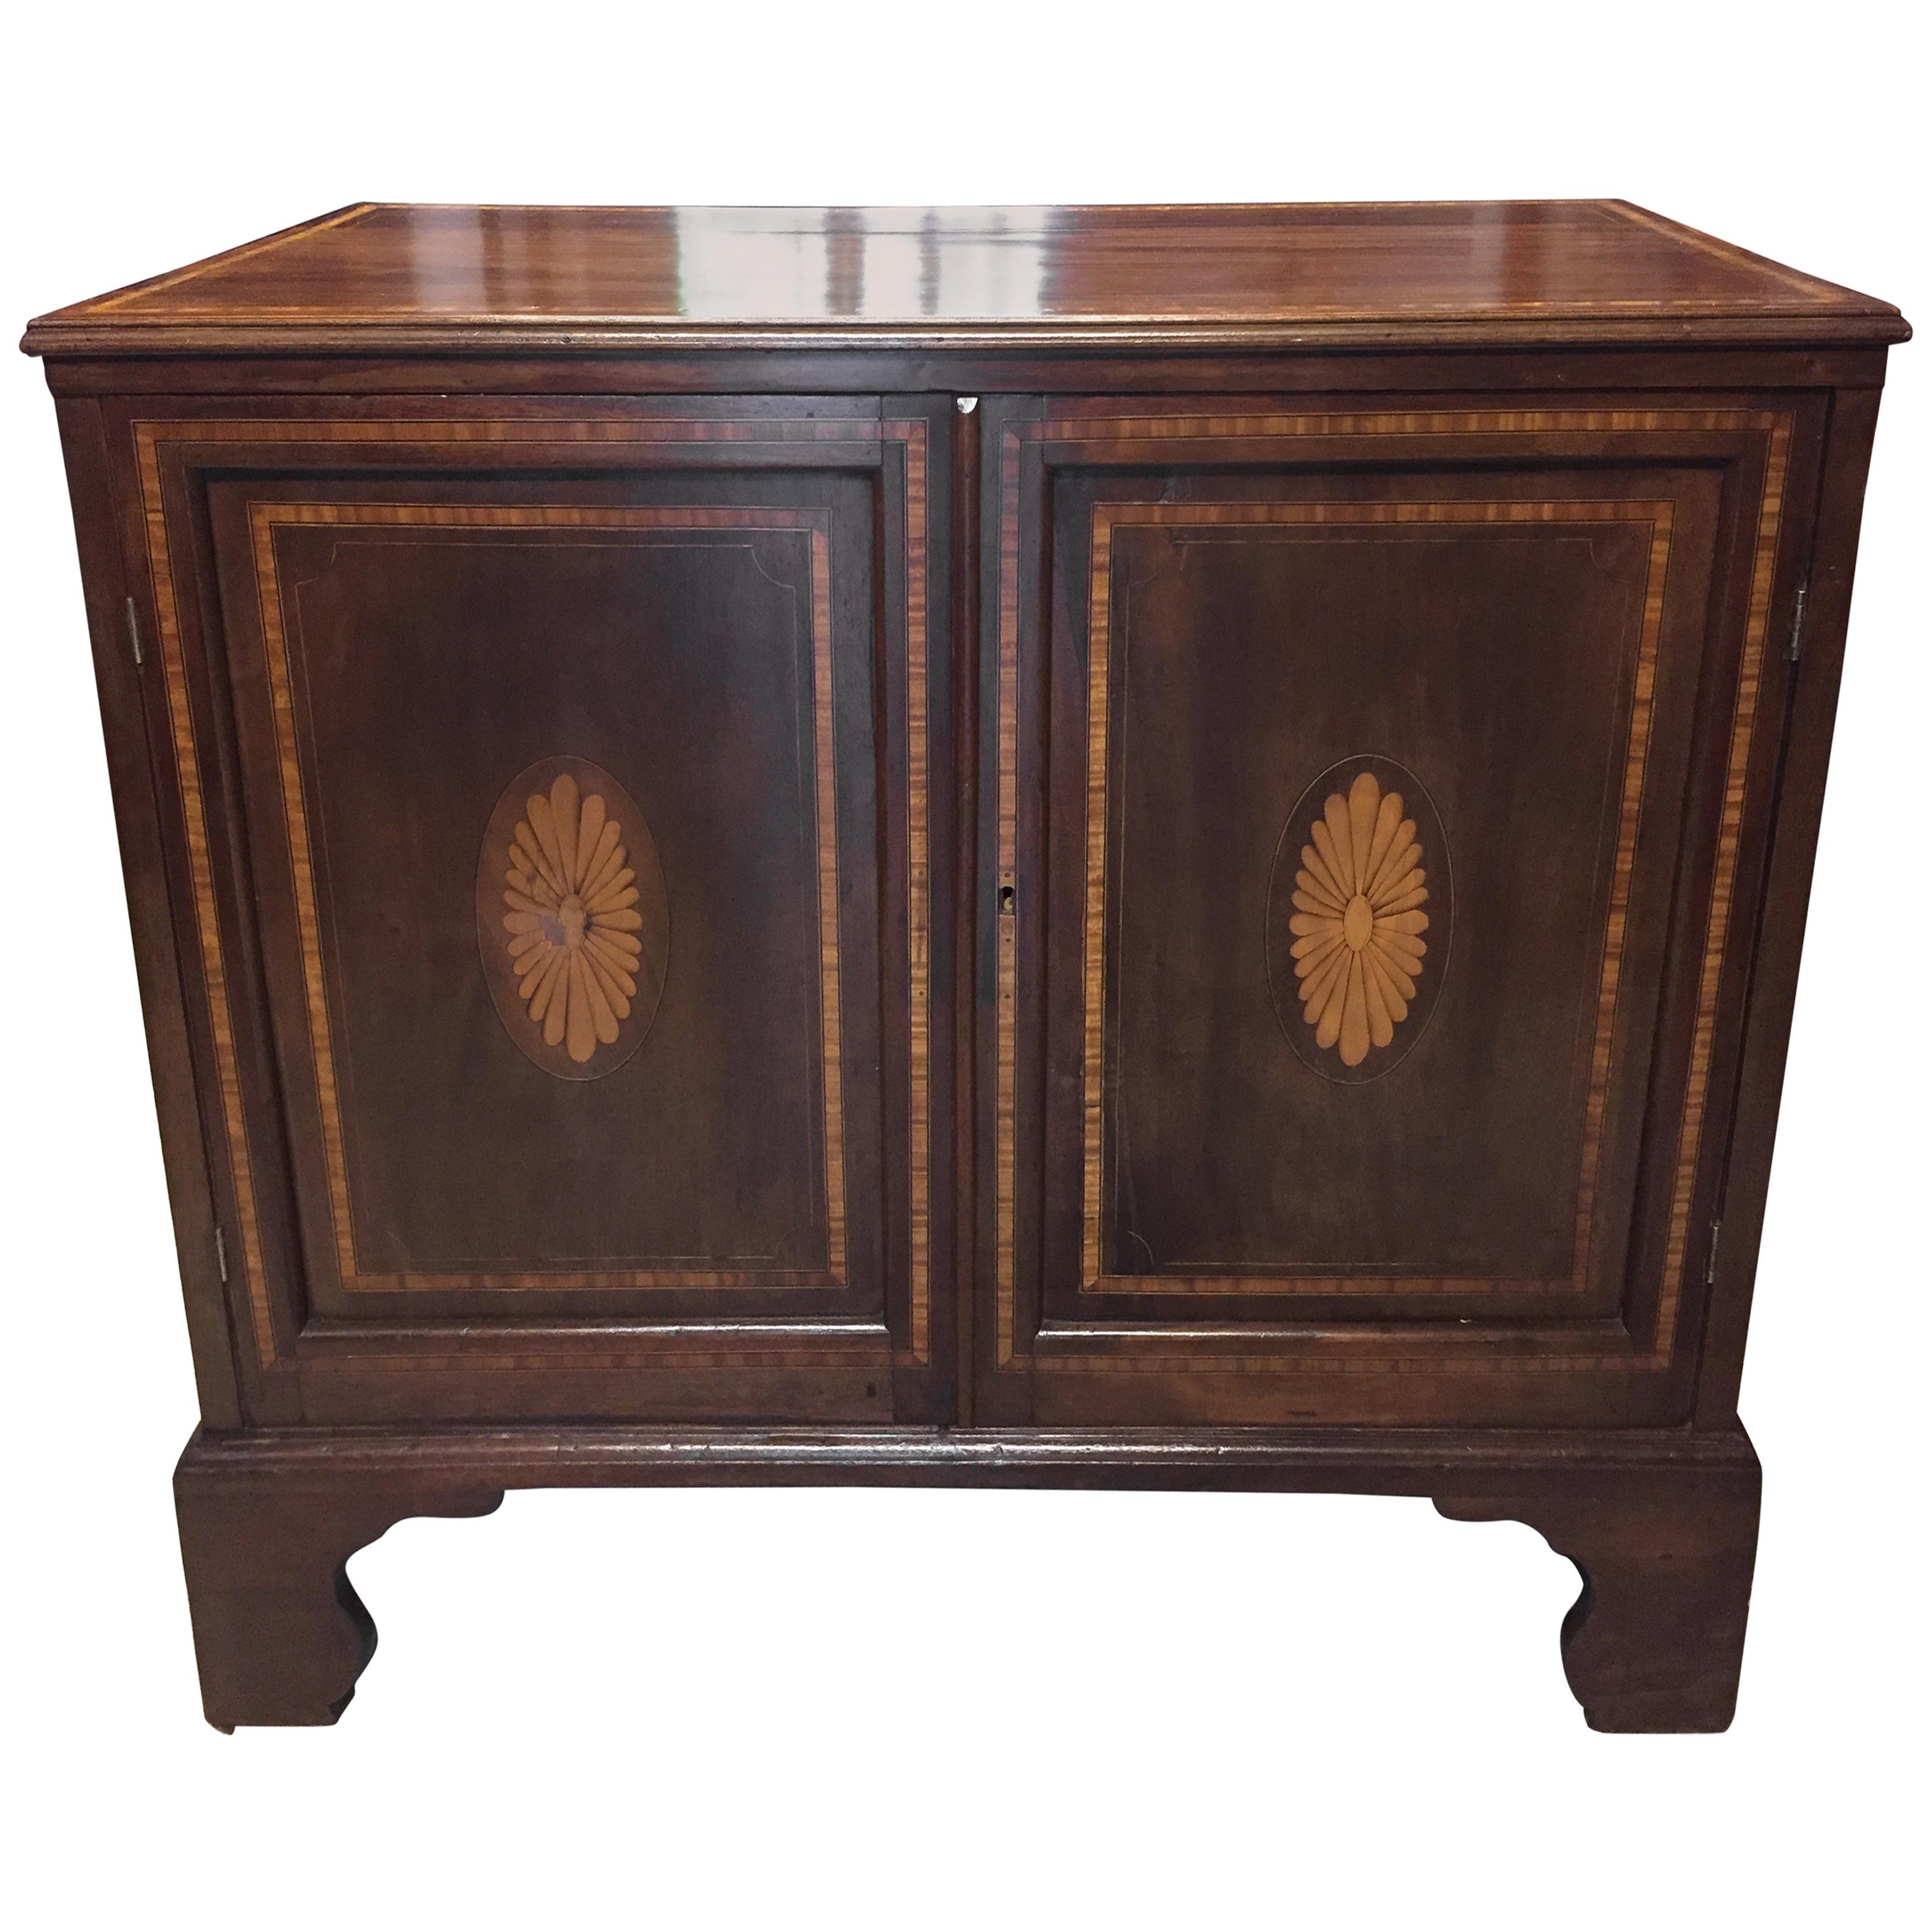 English Cabinet or Cupboard with Inlay For Sale